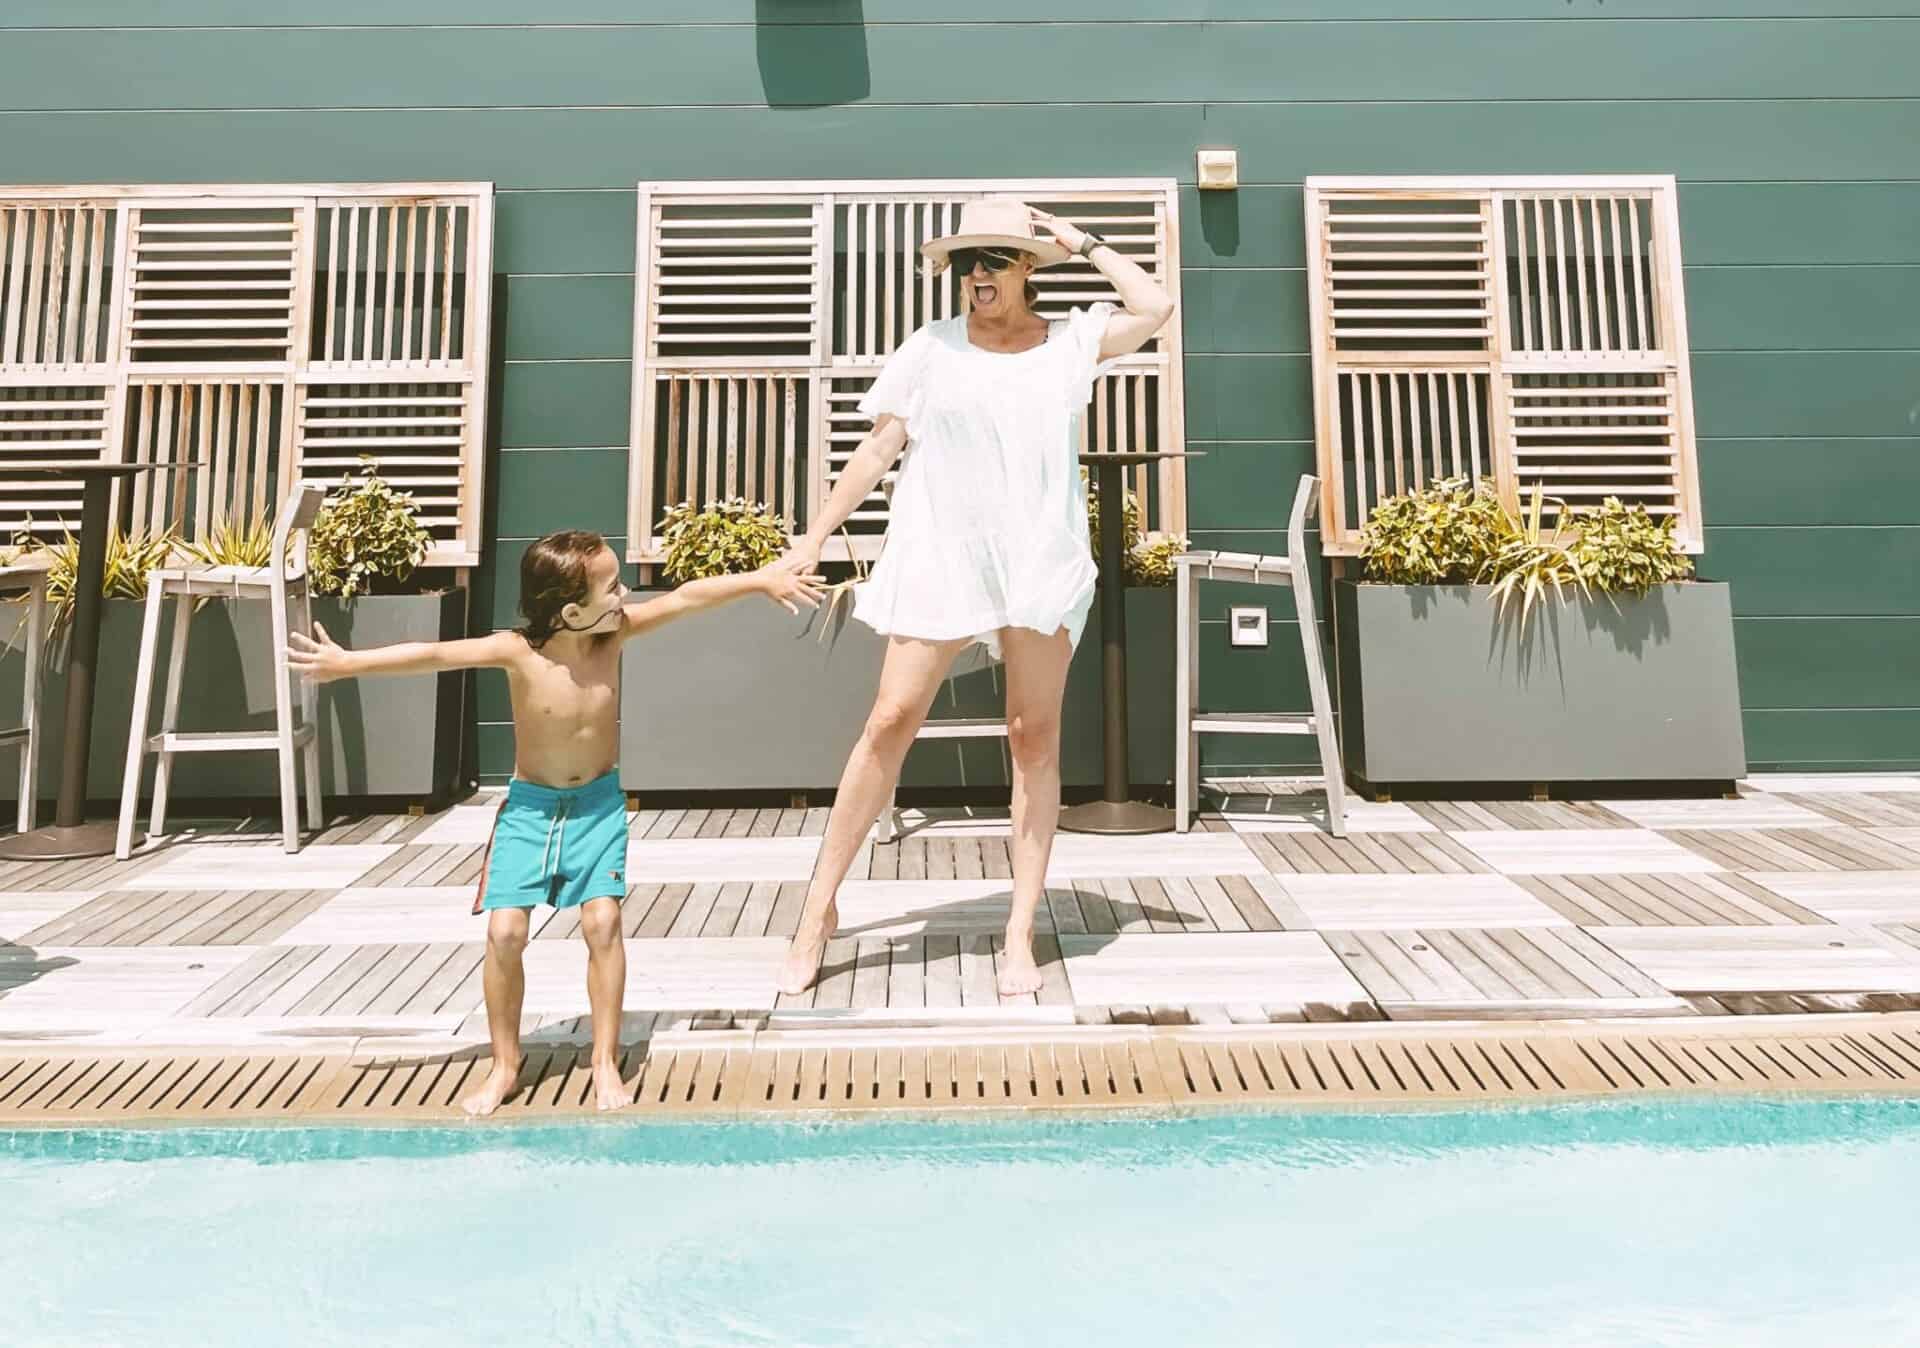 Mother and son having fun at the pool. The woman is wearing a hat and white swim coverup and the young boy is wearing blue swim trunks. He is getting ready to jump into the water.